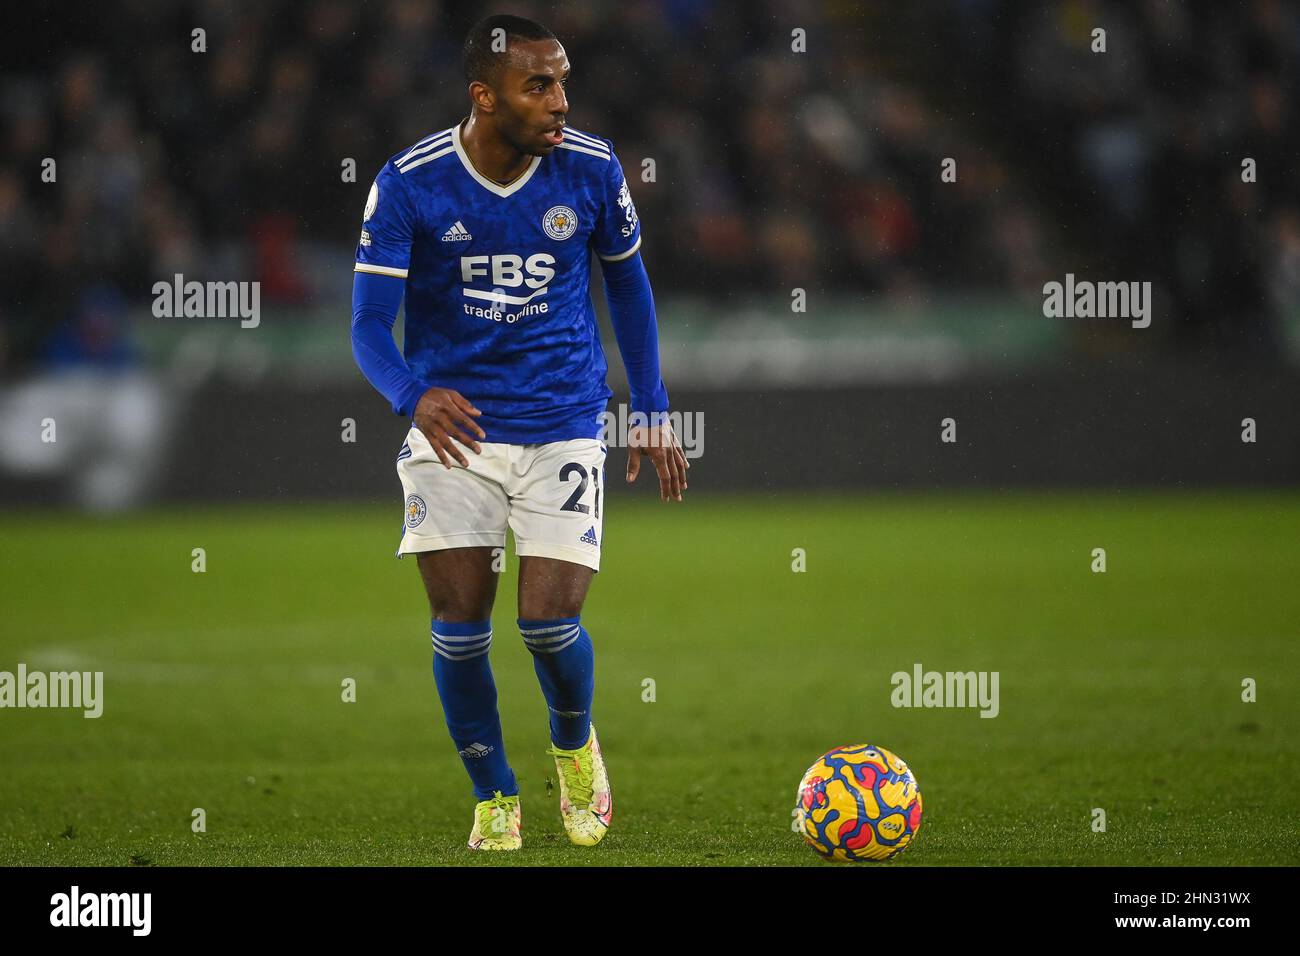 Ricardo Pereira #21 of Leicester City during the game in, on 2/13/2022